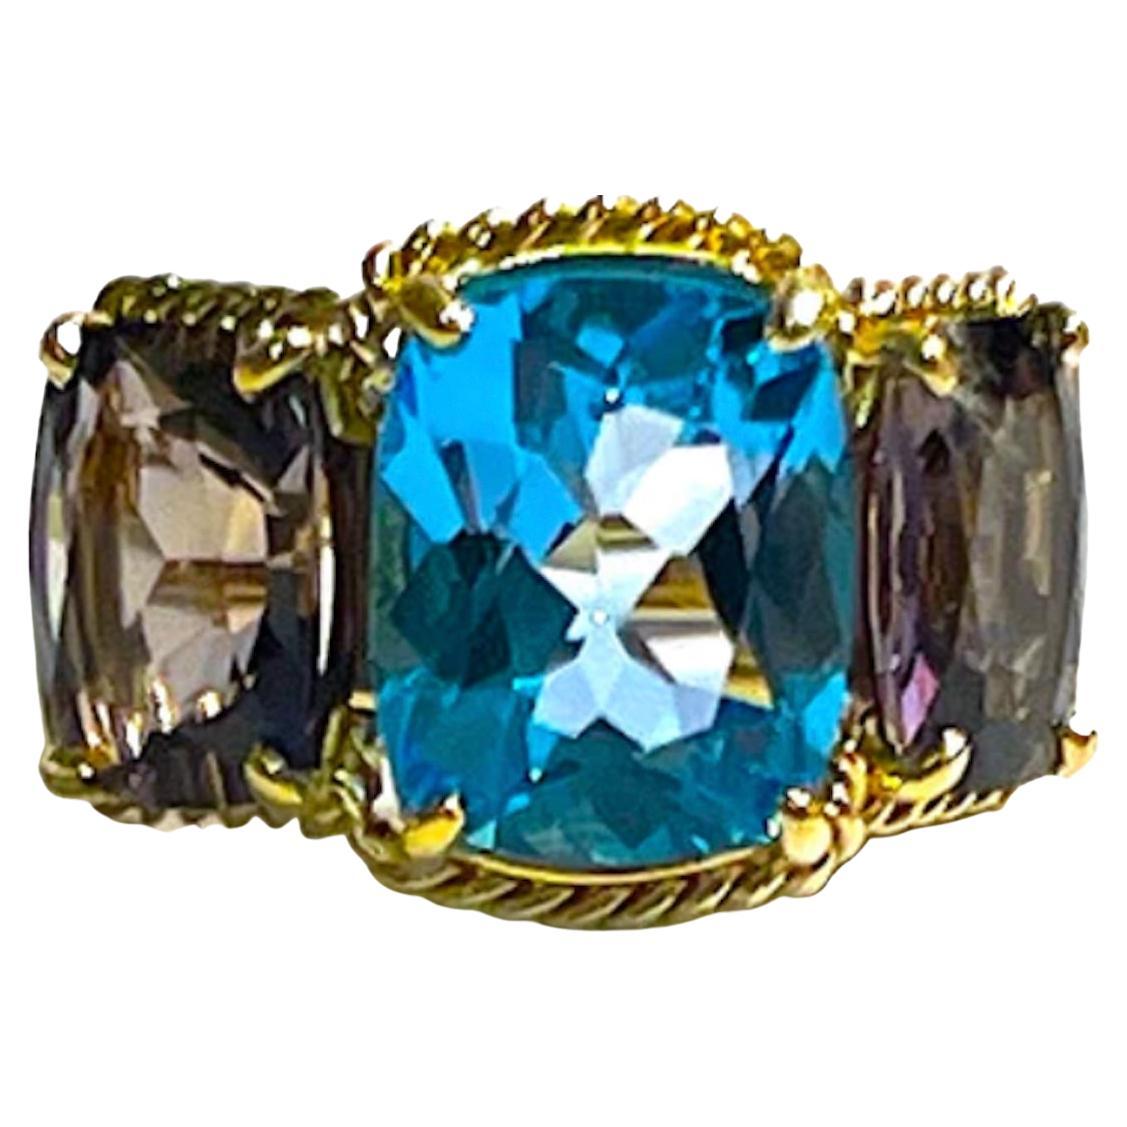 Elegant 18kt White Gold Three Stone Ring with Rope Twist Border with split shank detail. The ring features a center faceted cushion cut Blue Topaz and two cushion cut Iolite stones surrounded by twisted gold rope. The center stone measures 5/8